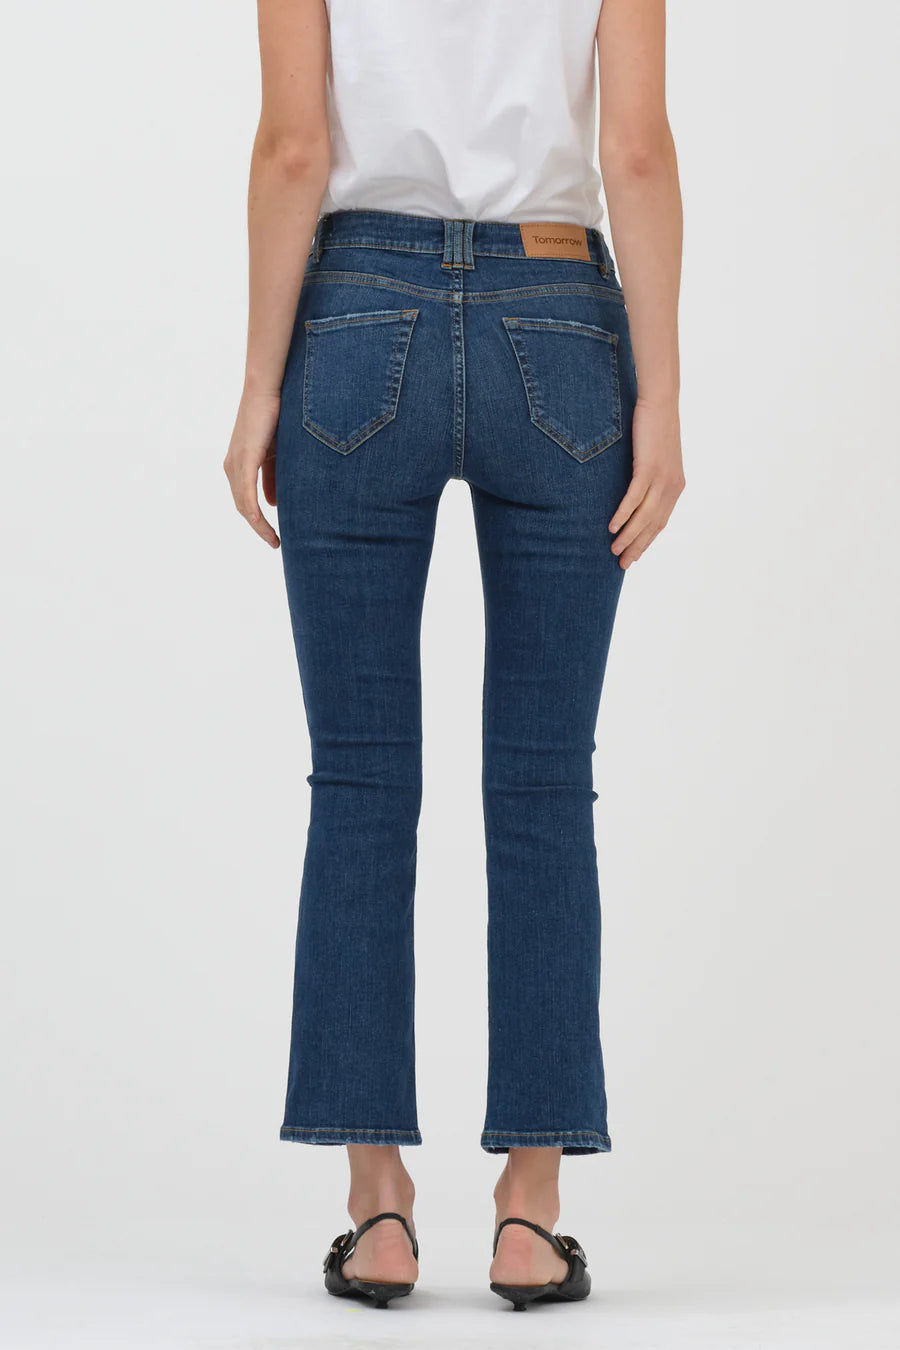 The back view of a woman wearing a pair of Tomorrow Denim - Malcolm Jeans - Denver.